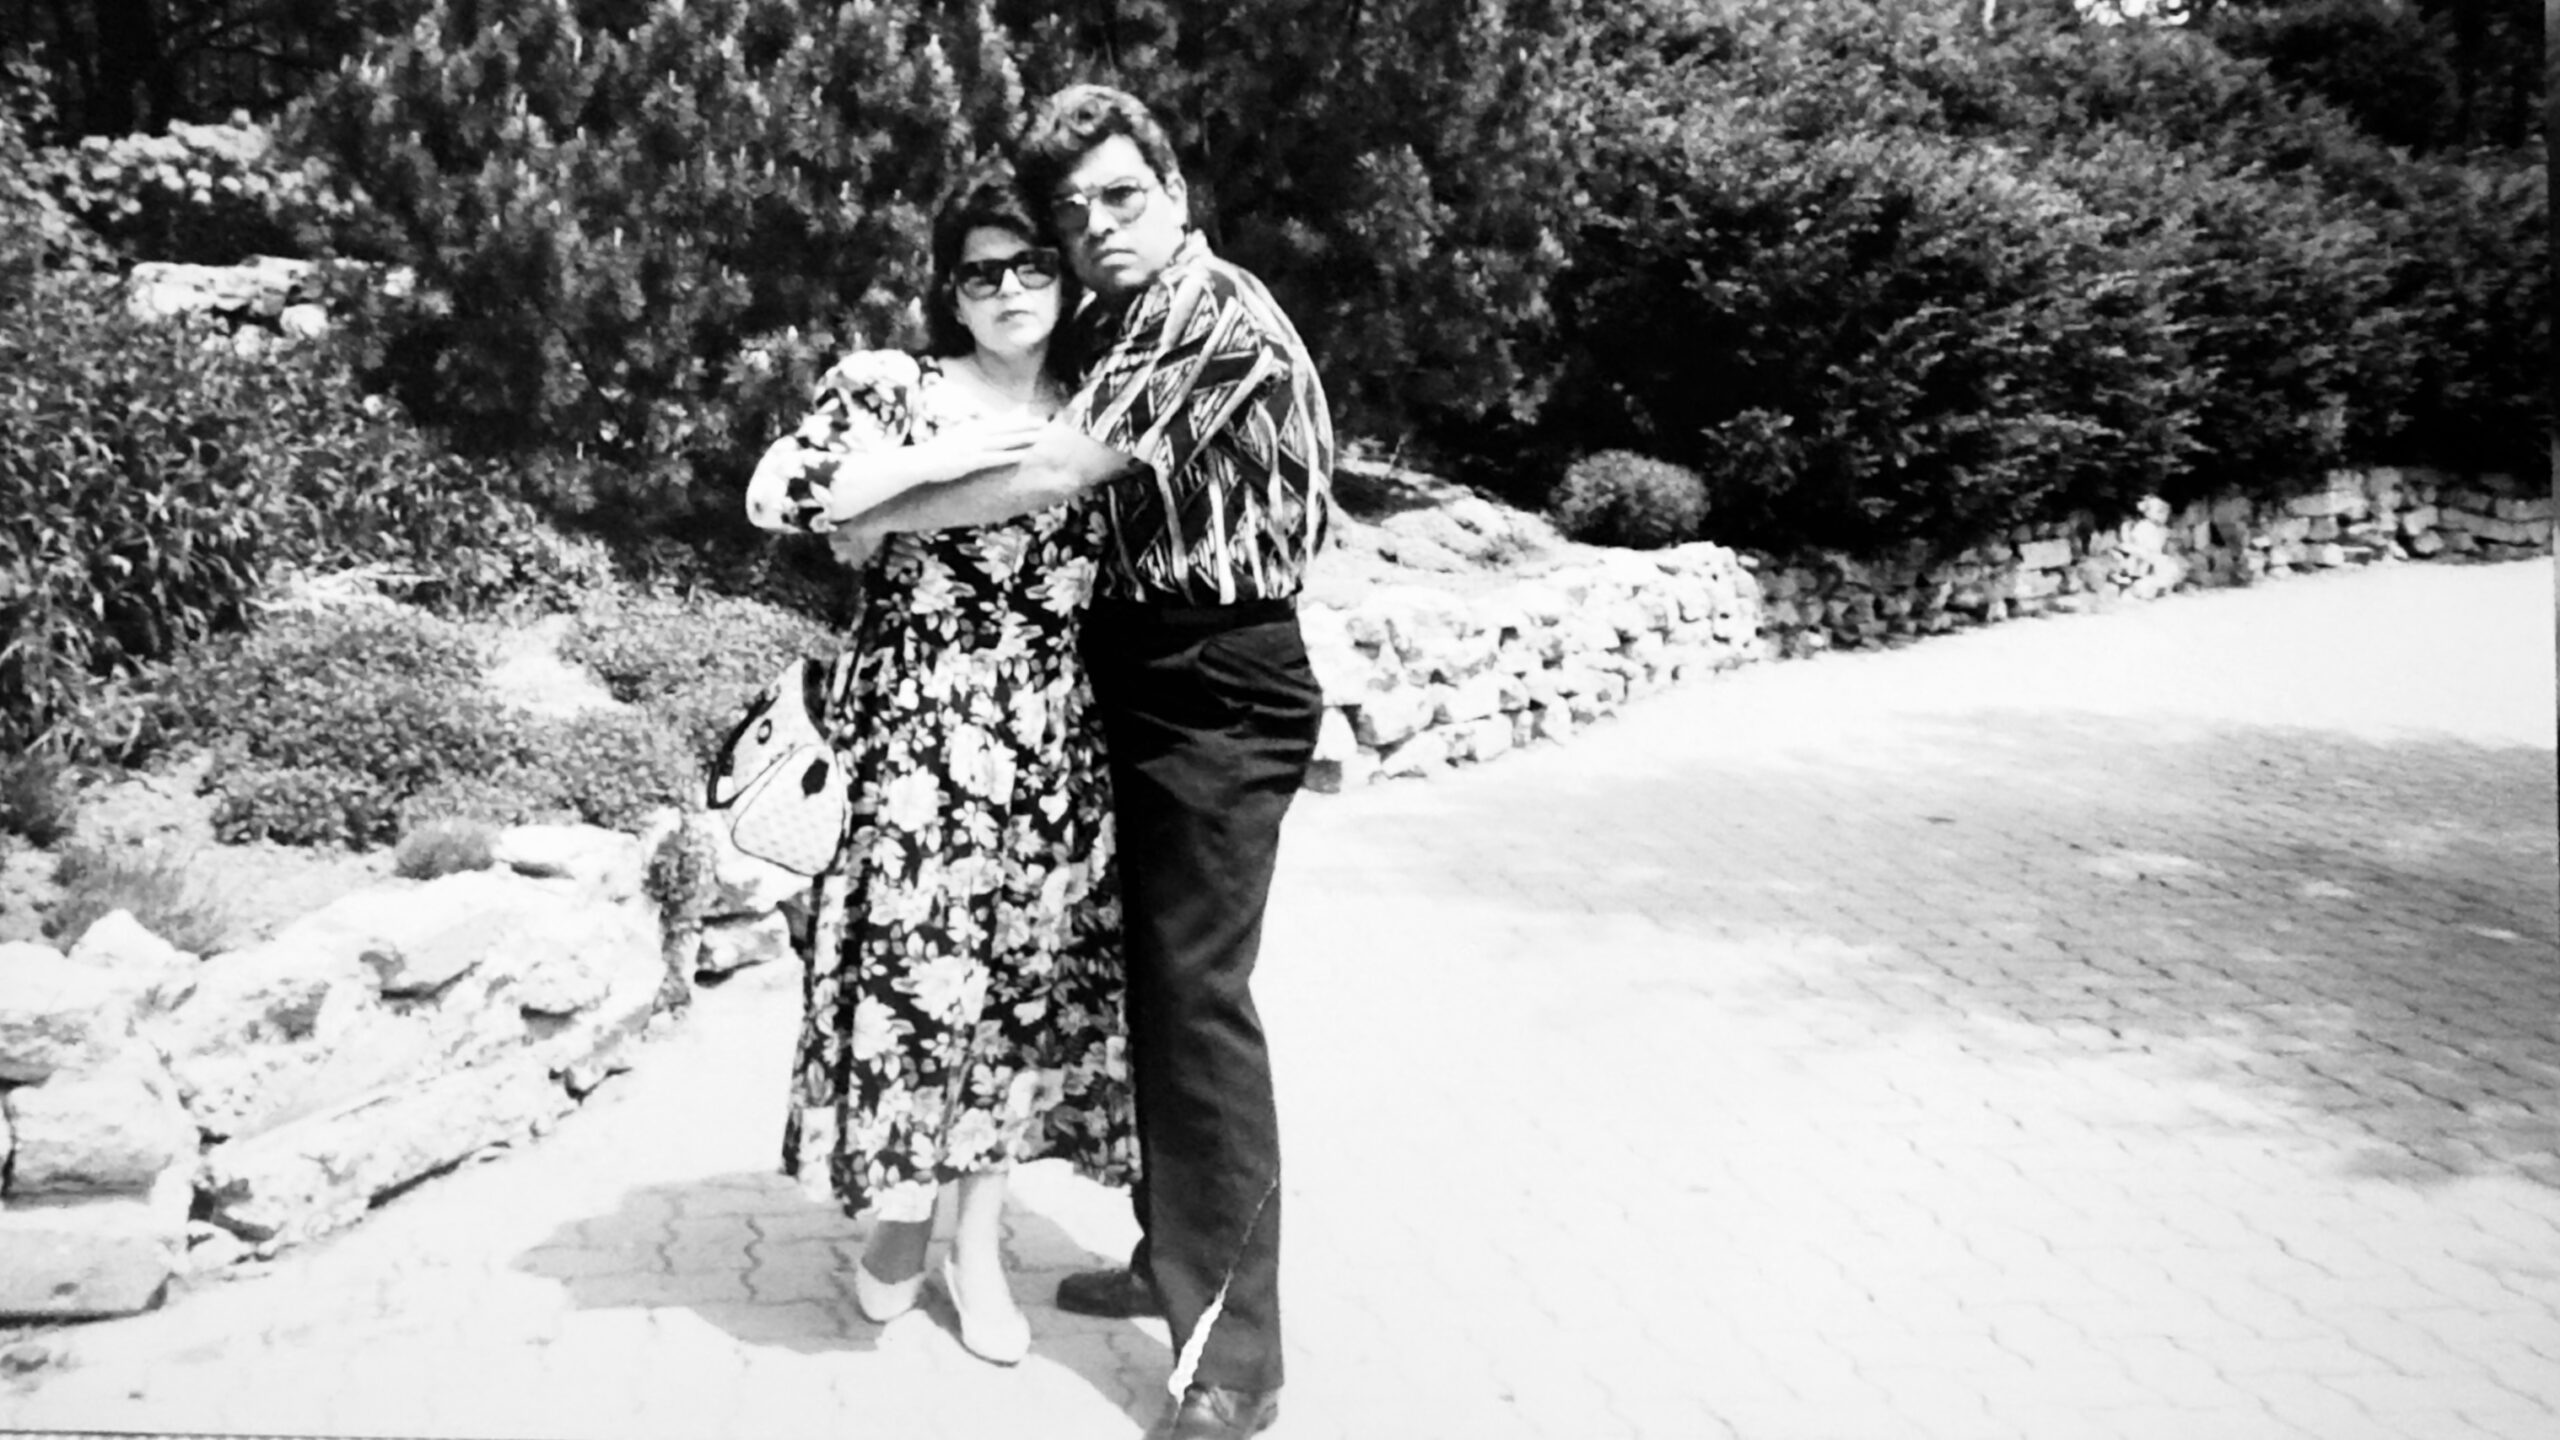 Nancy's parents, Frank and Milagro, in the 80's posing in a park in Chatham, ON. This article covers the question, How do I live with grief?